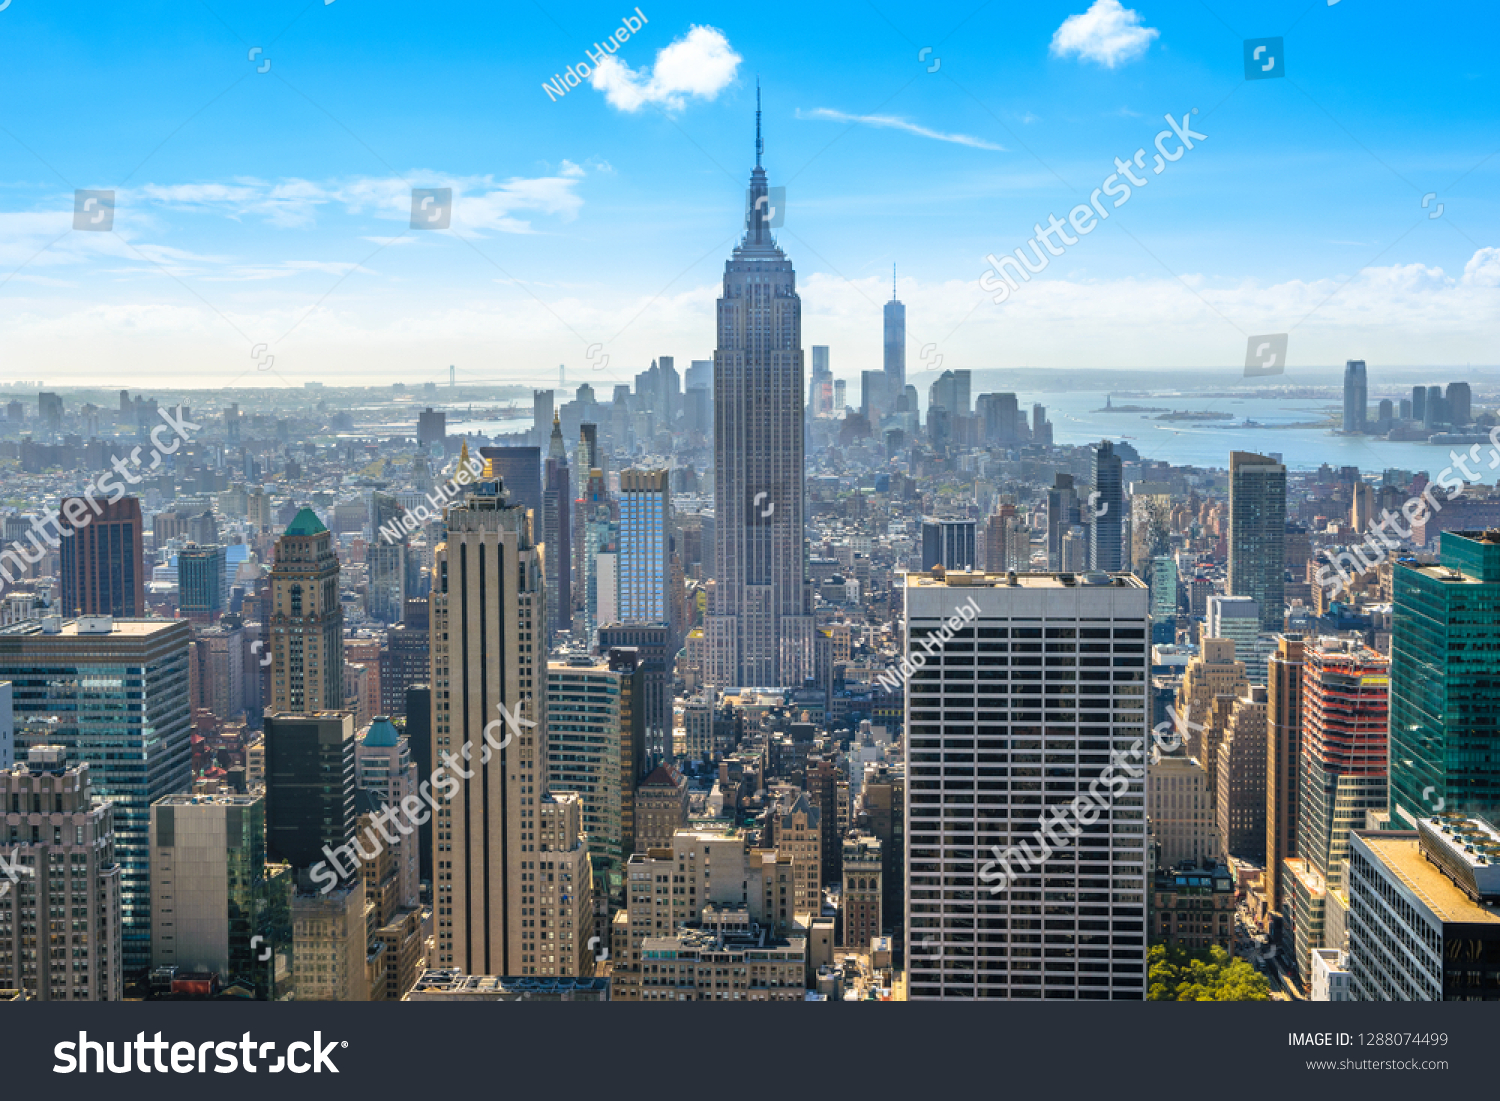 Beautiful skyline of Midtown Manhattan from Rockefeller Observatory - Top of the Rock - New York, USA #1288074499